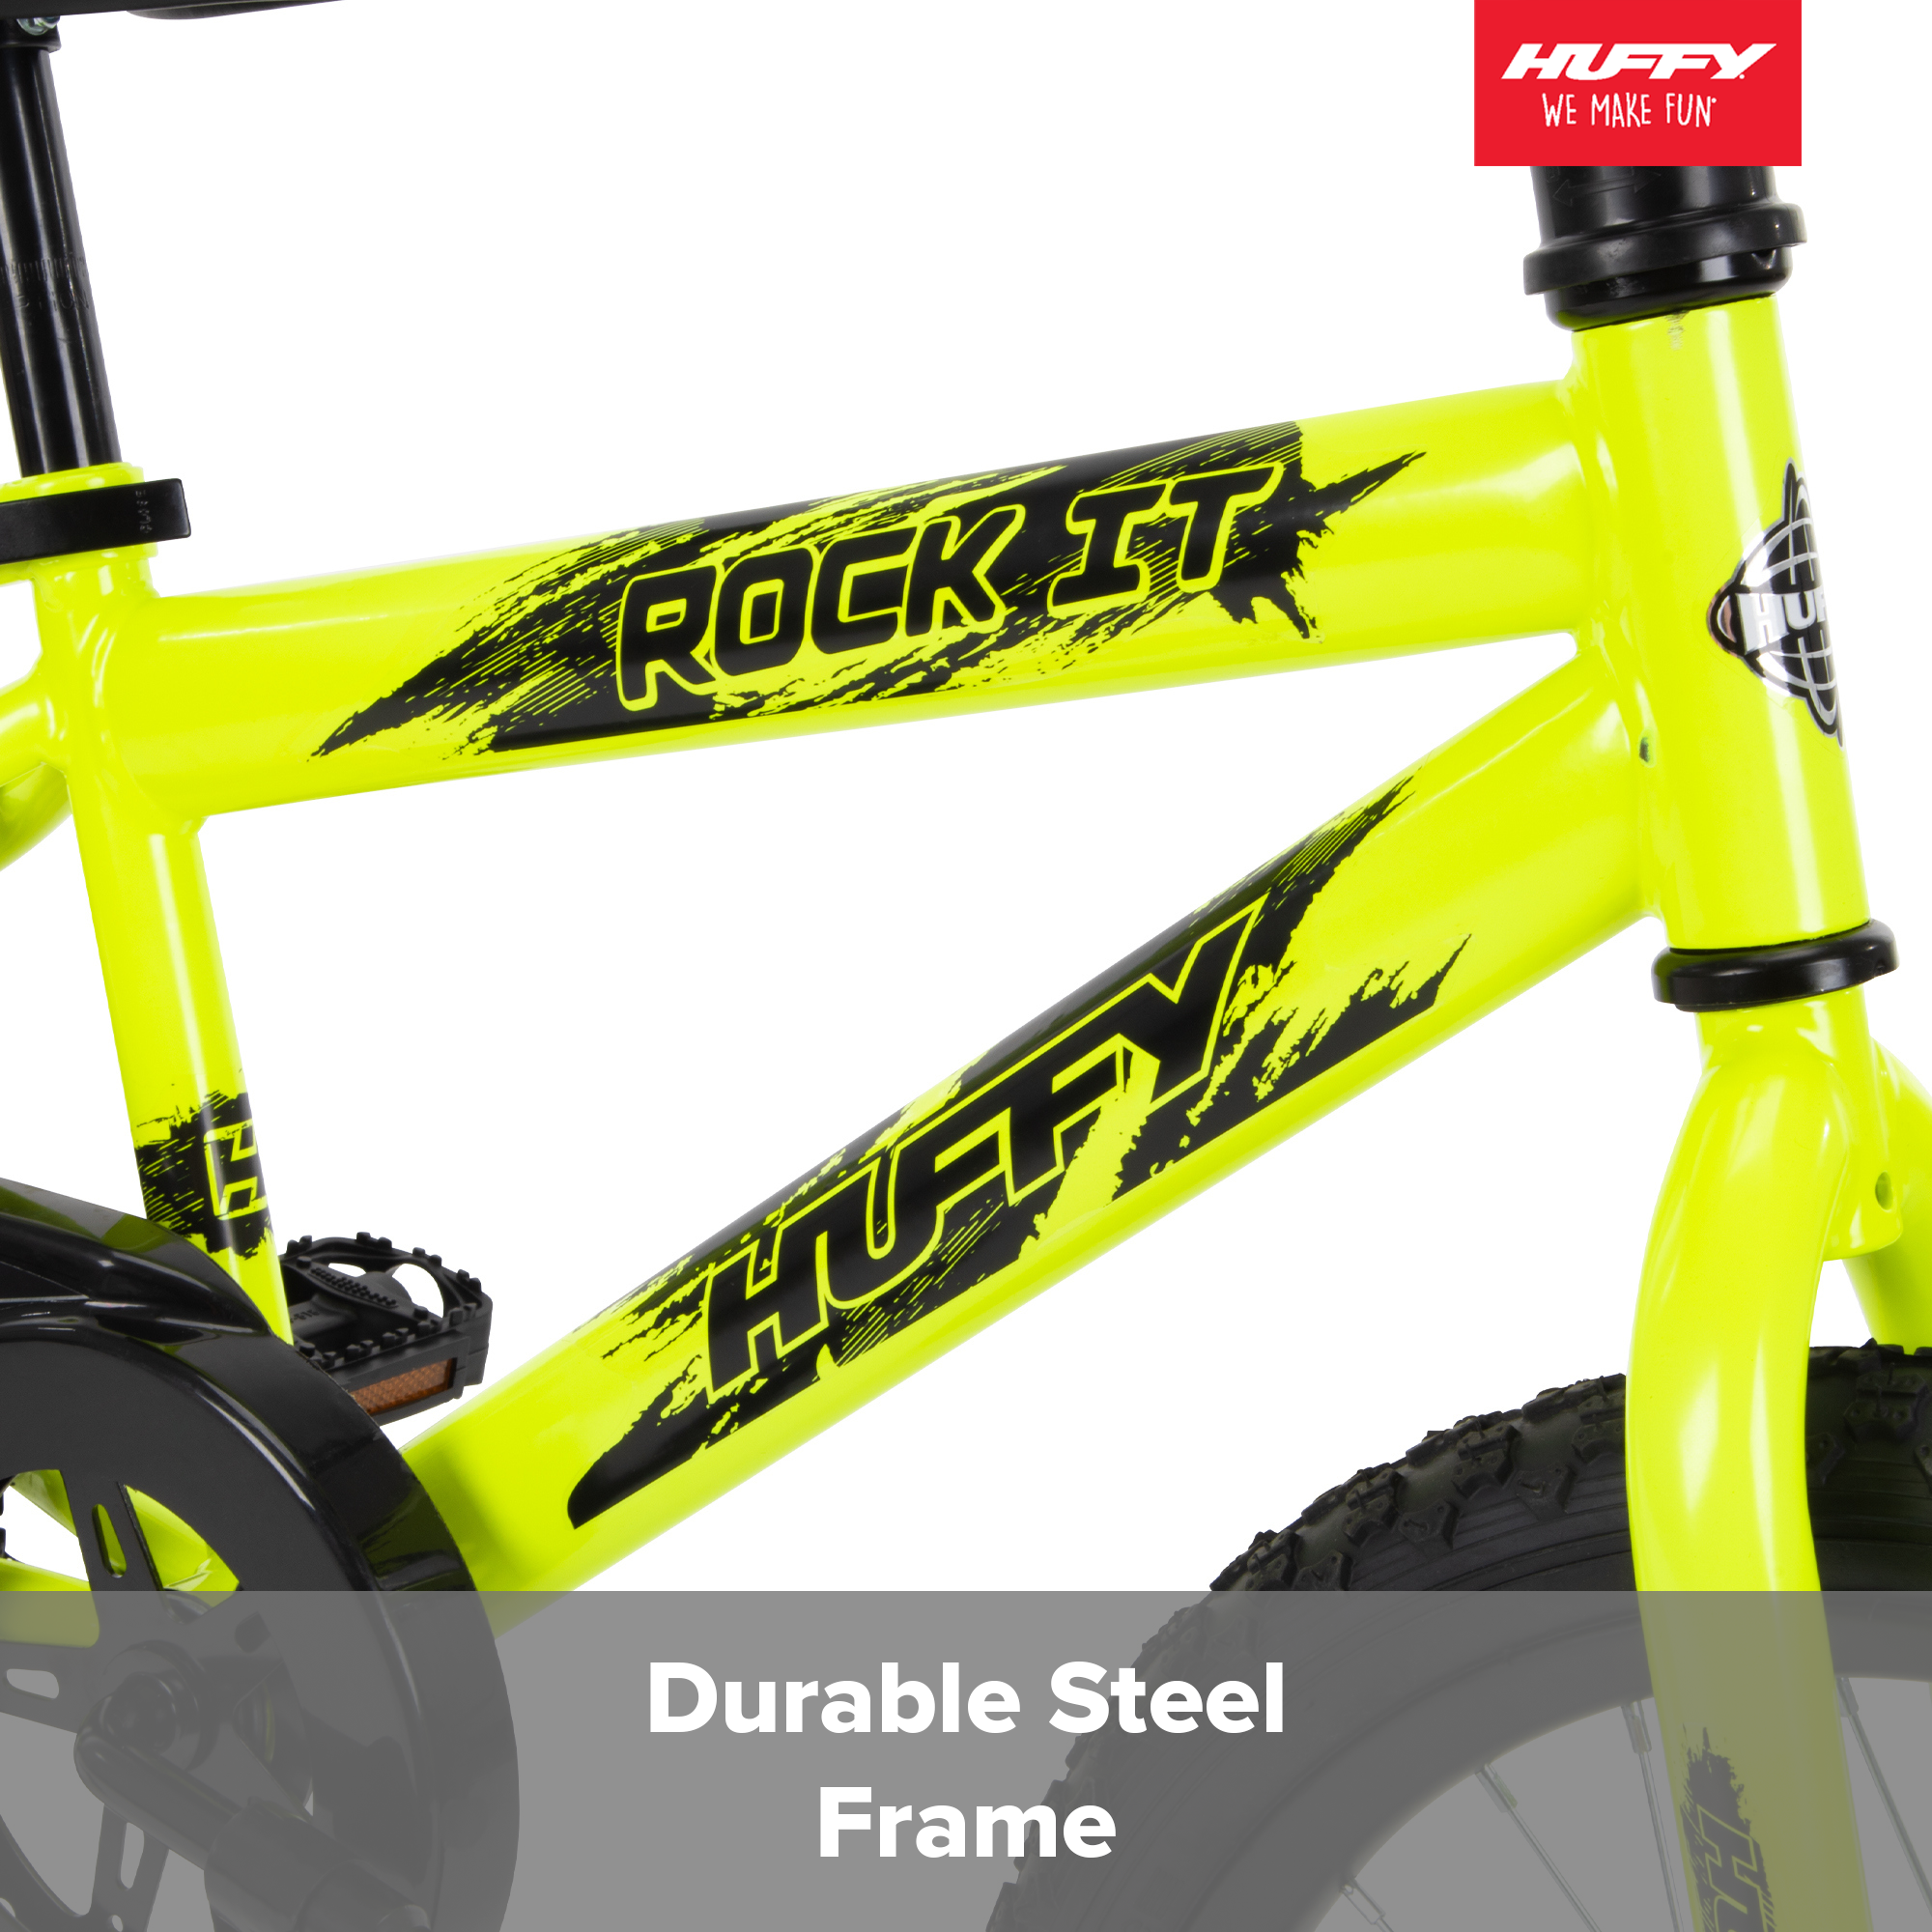 Huffy 18 in. Rock It Kids Bike for Boys Ages 4 and up, Child, Neon Powder Yellow - image 5 of 16